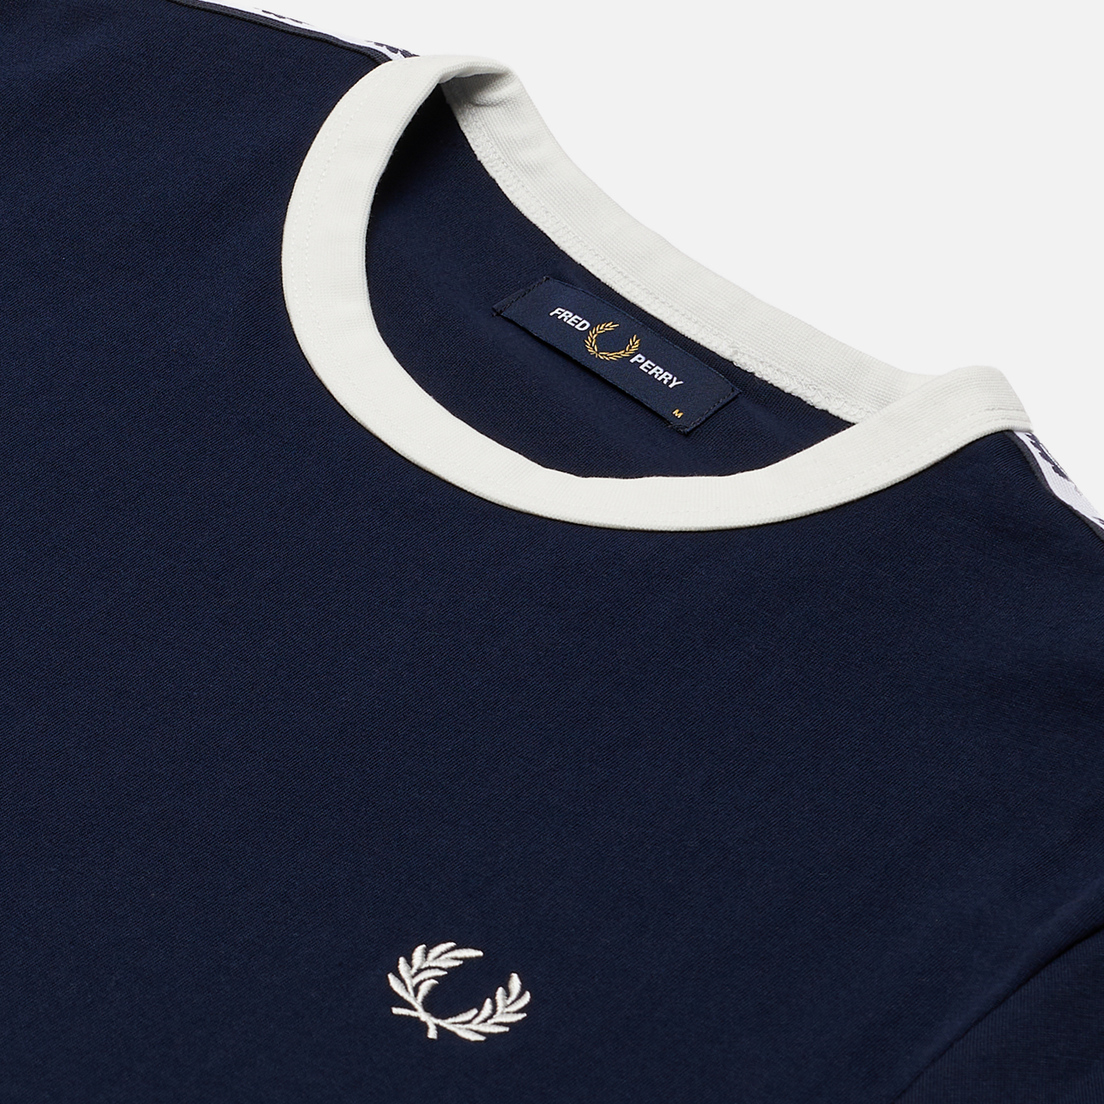 Fred Perry Мужская футболка Taped Ringer